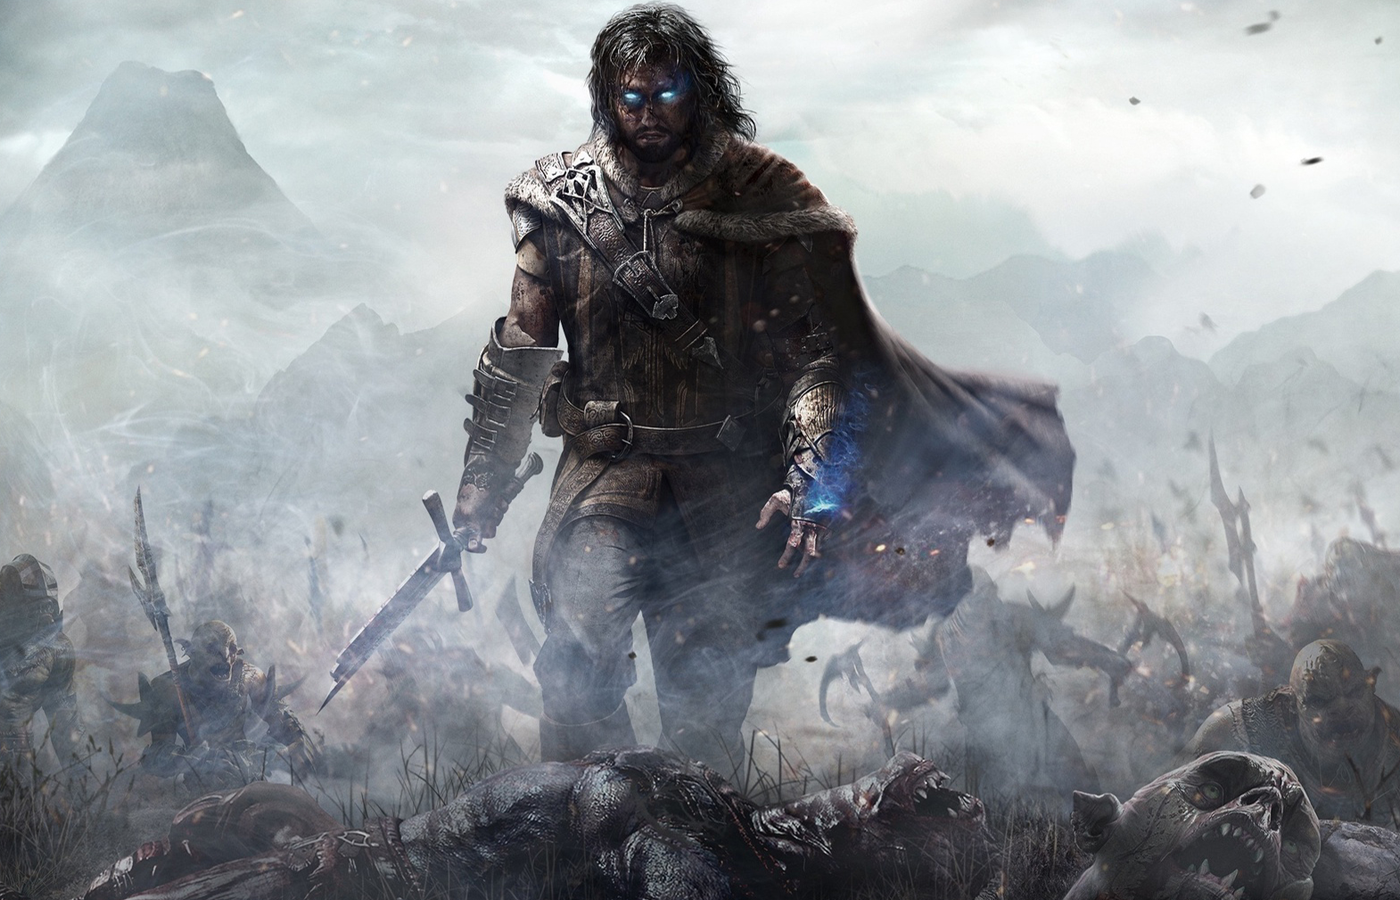 Daily Deal: Shadow of Mordor Is Only $4 On Xbox One - Gameranx